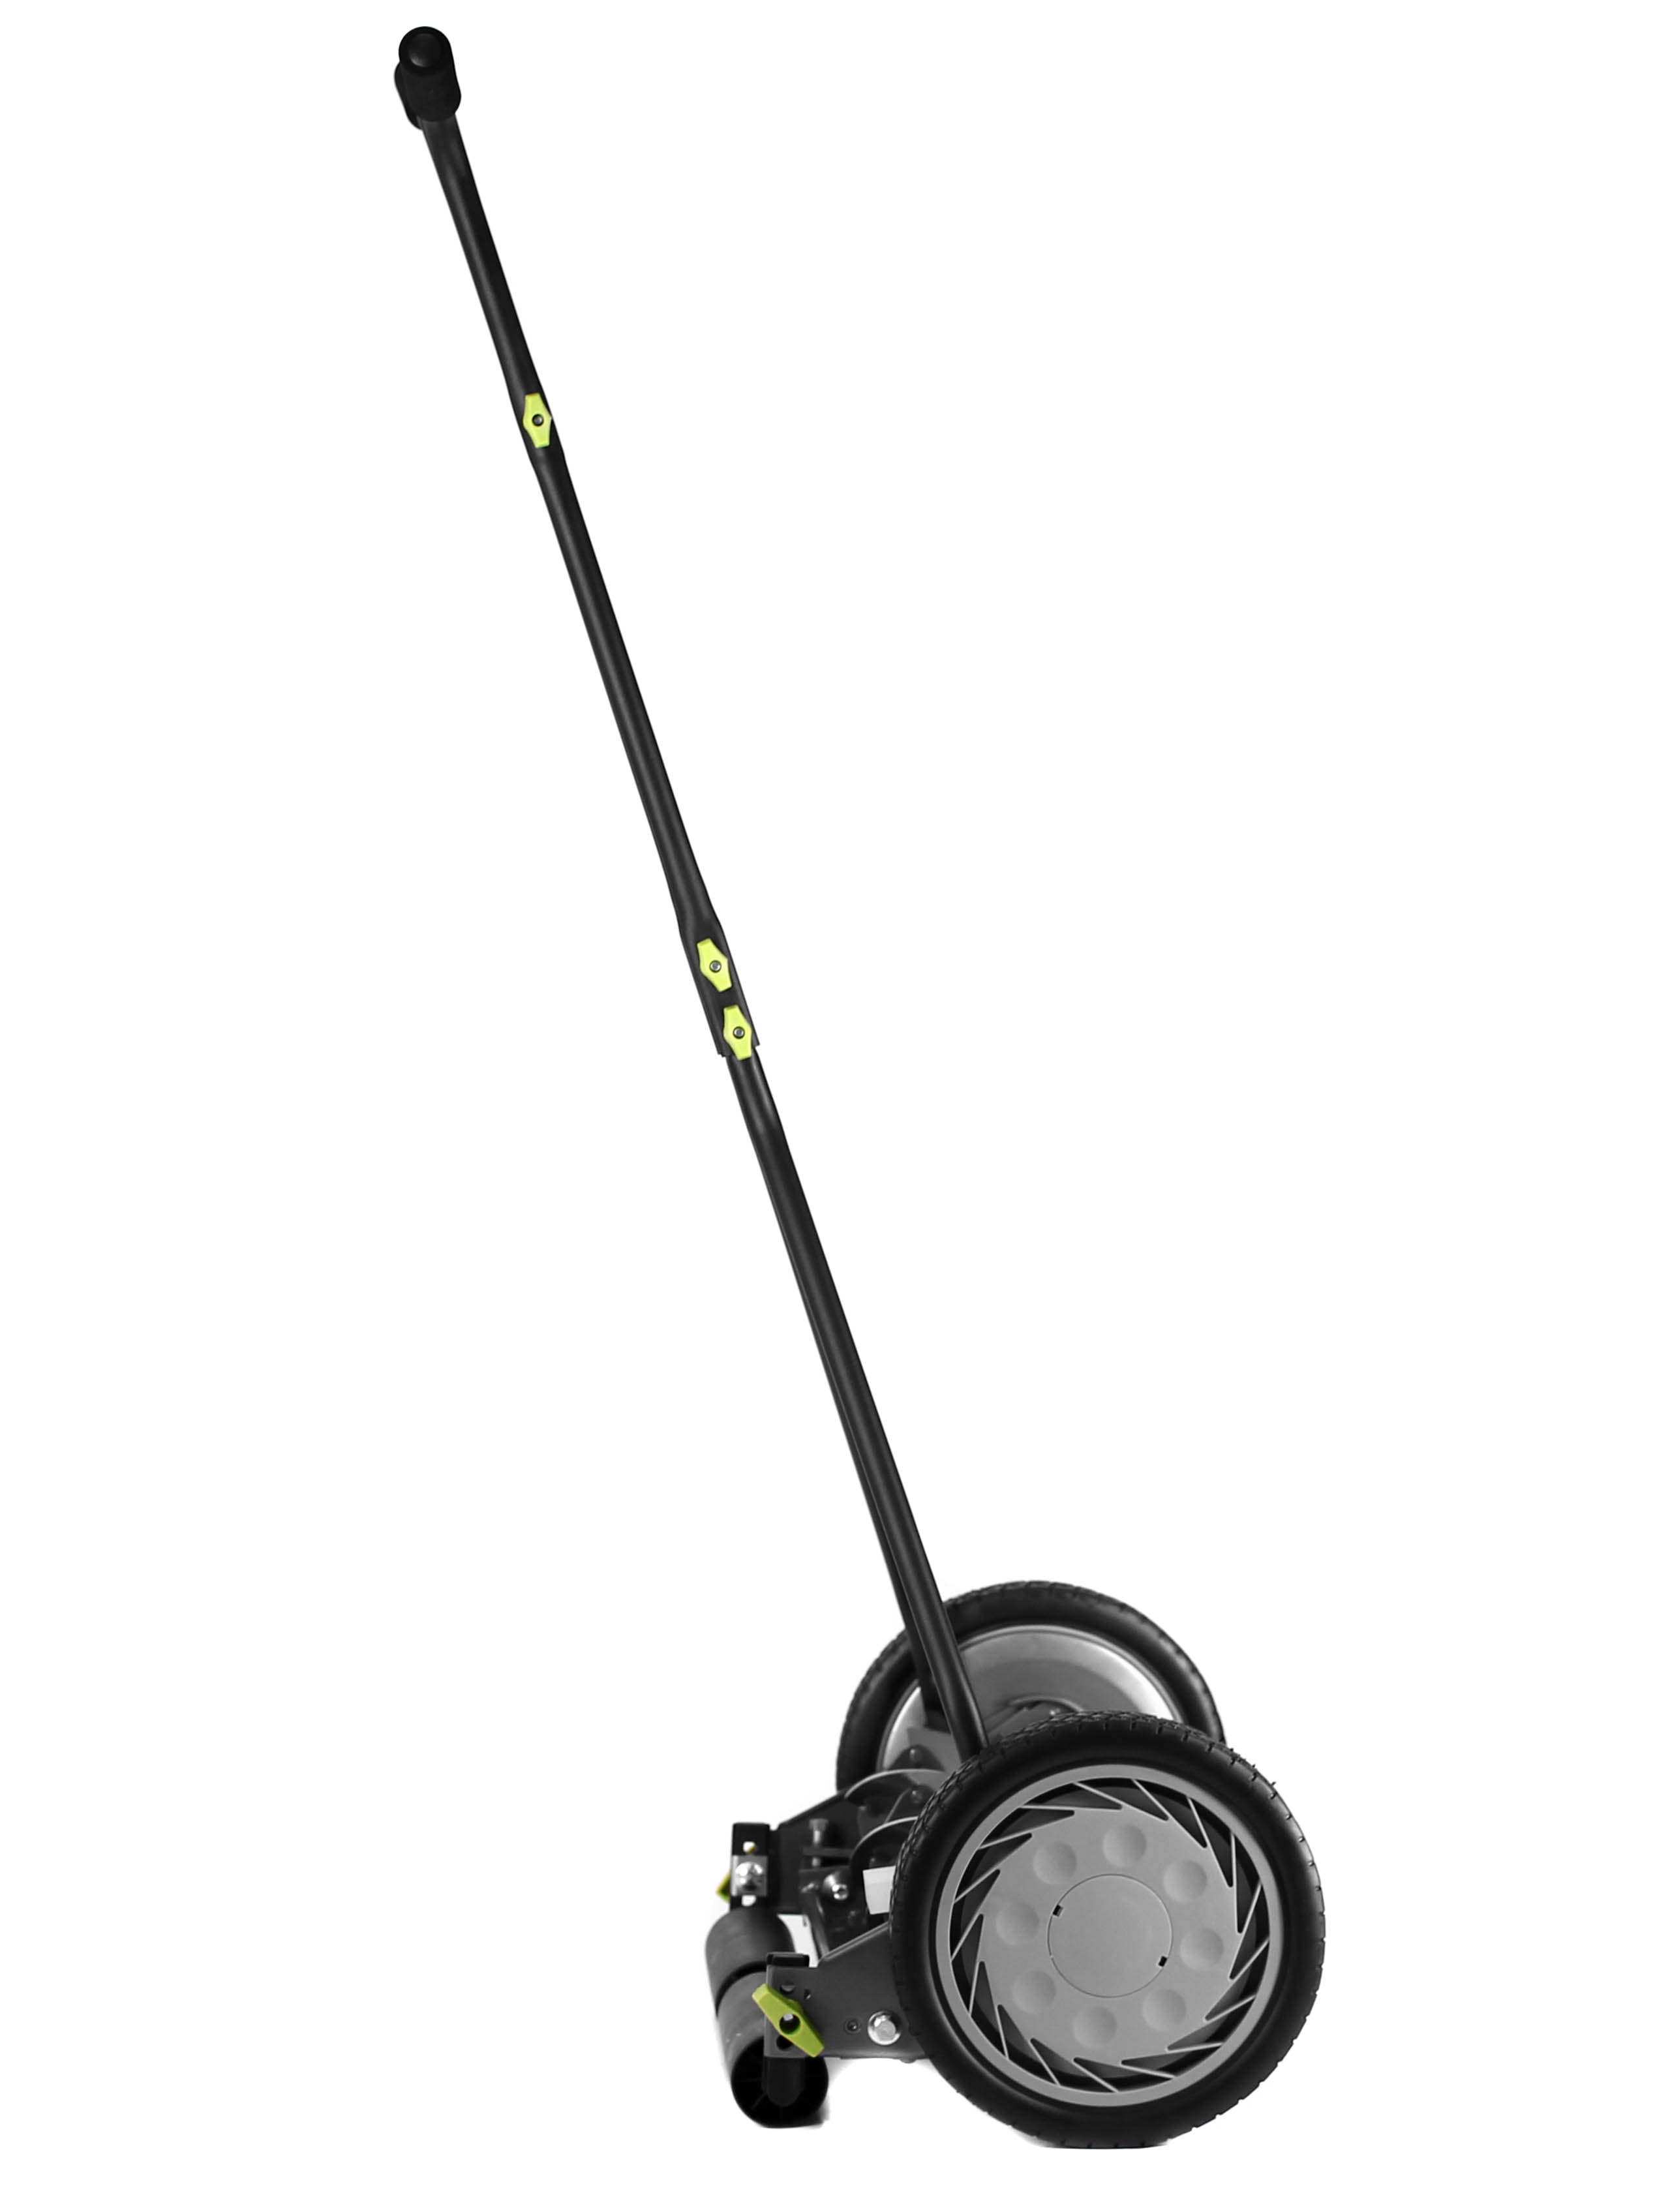 Earthwise 16-Inch 7-Blade Push Reel Lawn Mower Italy